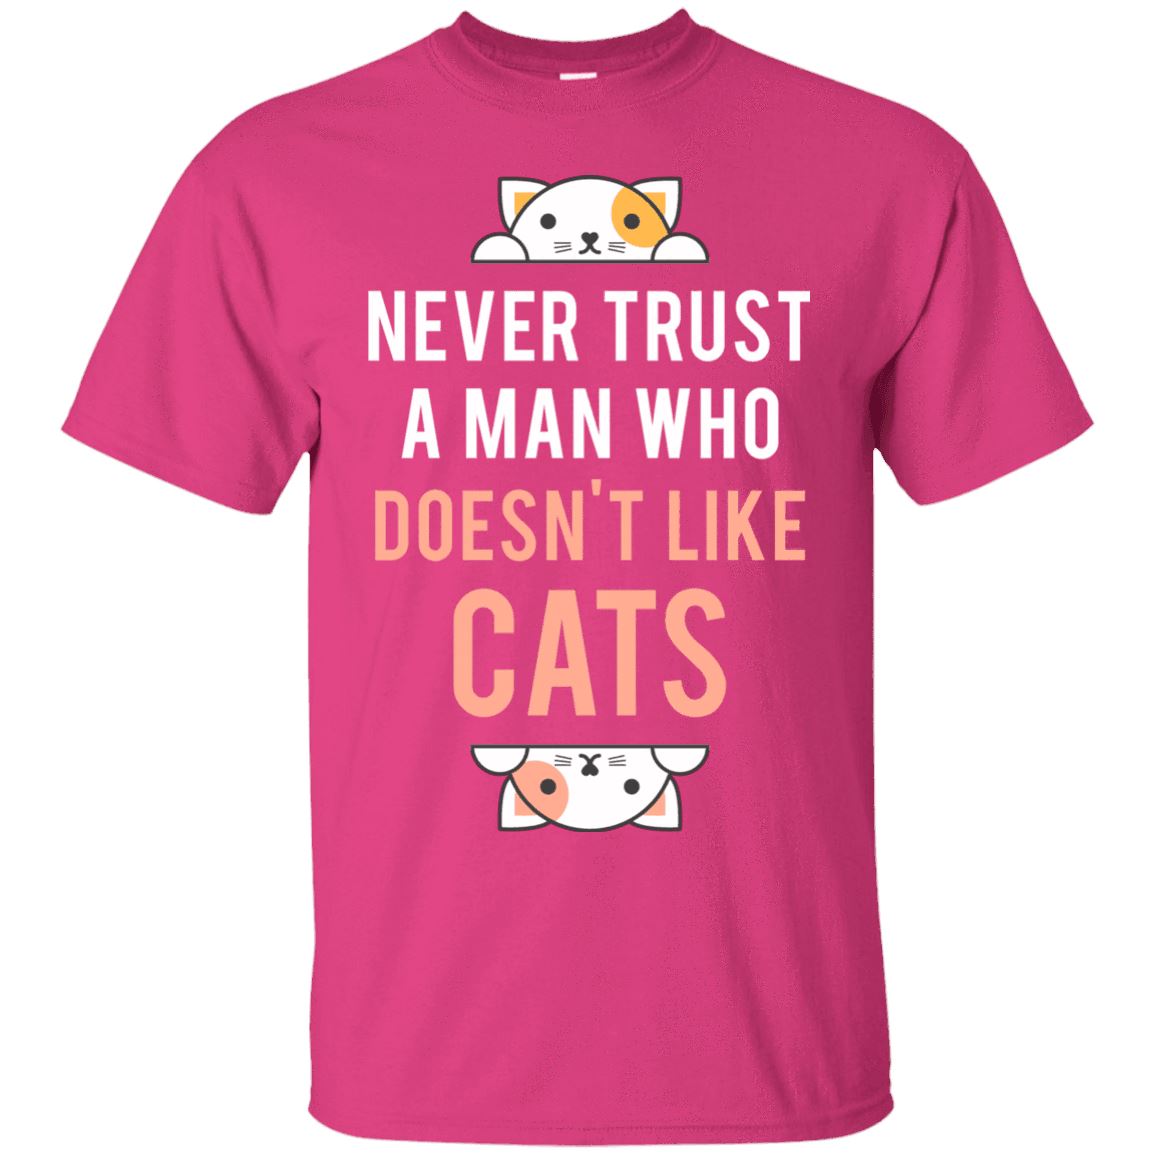 Cat Shirt - Never Trust A Man Who Doesn't Like Cats